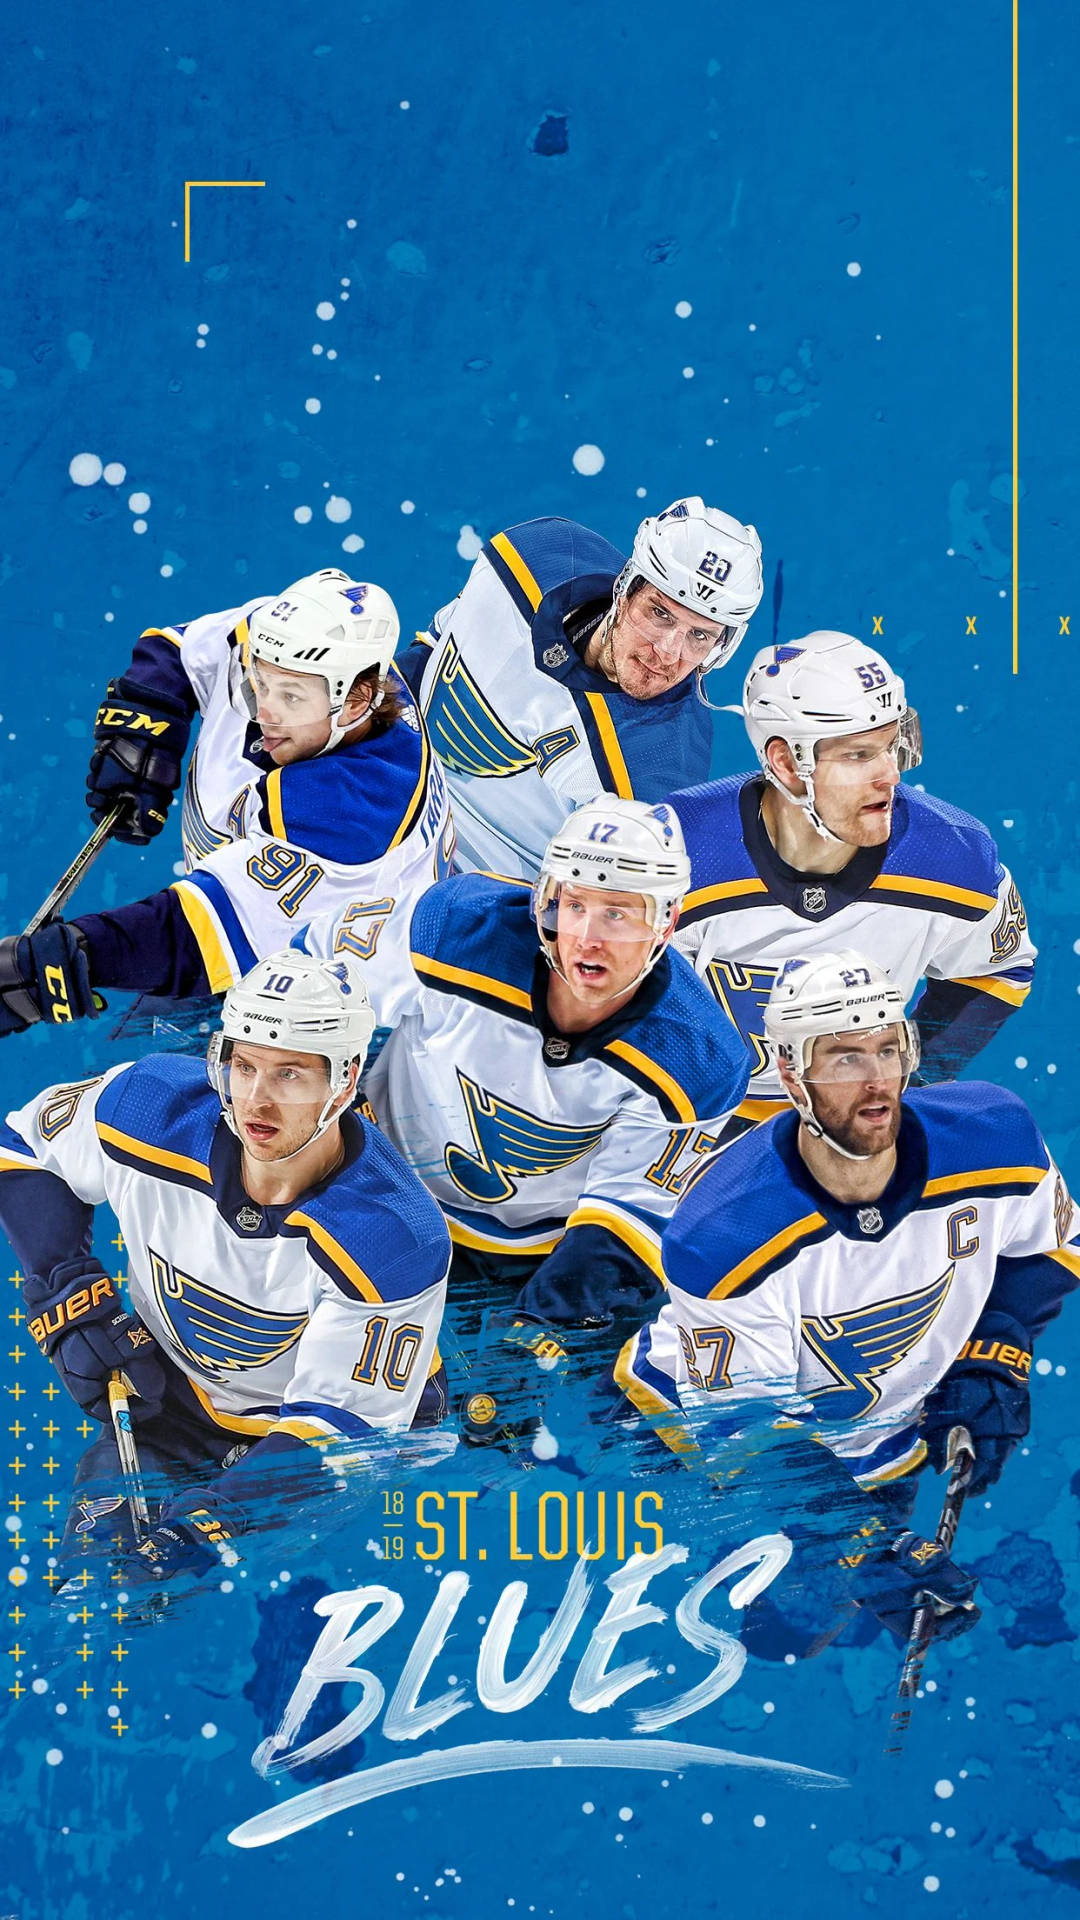 St. Louis Blues Hockey Team in Action Wallpaper